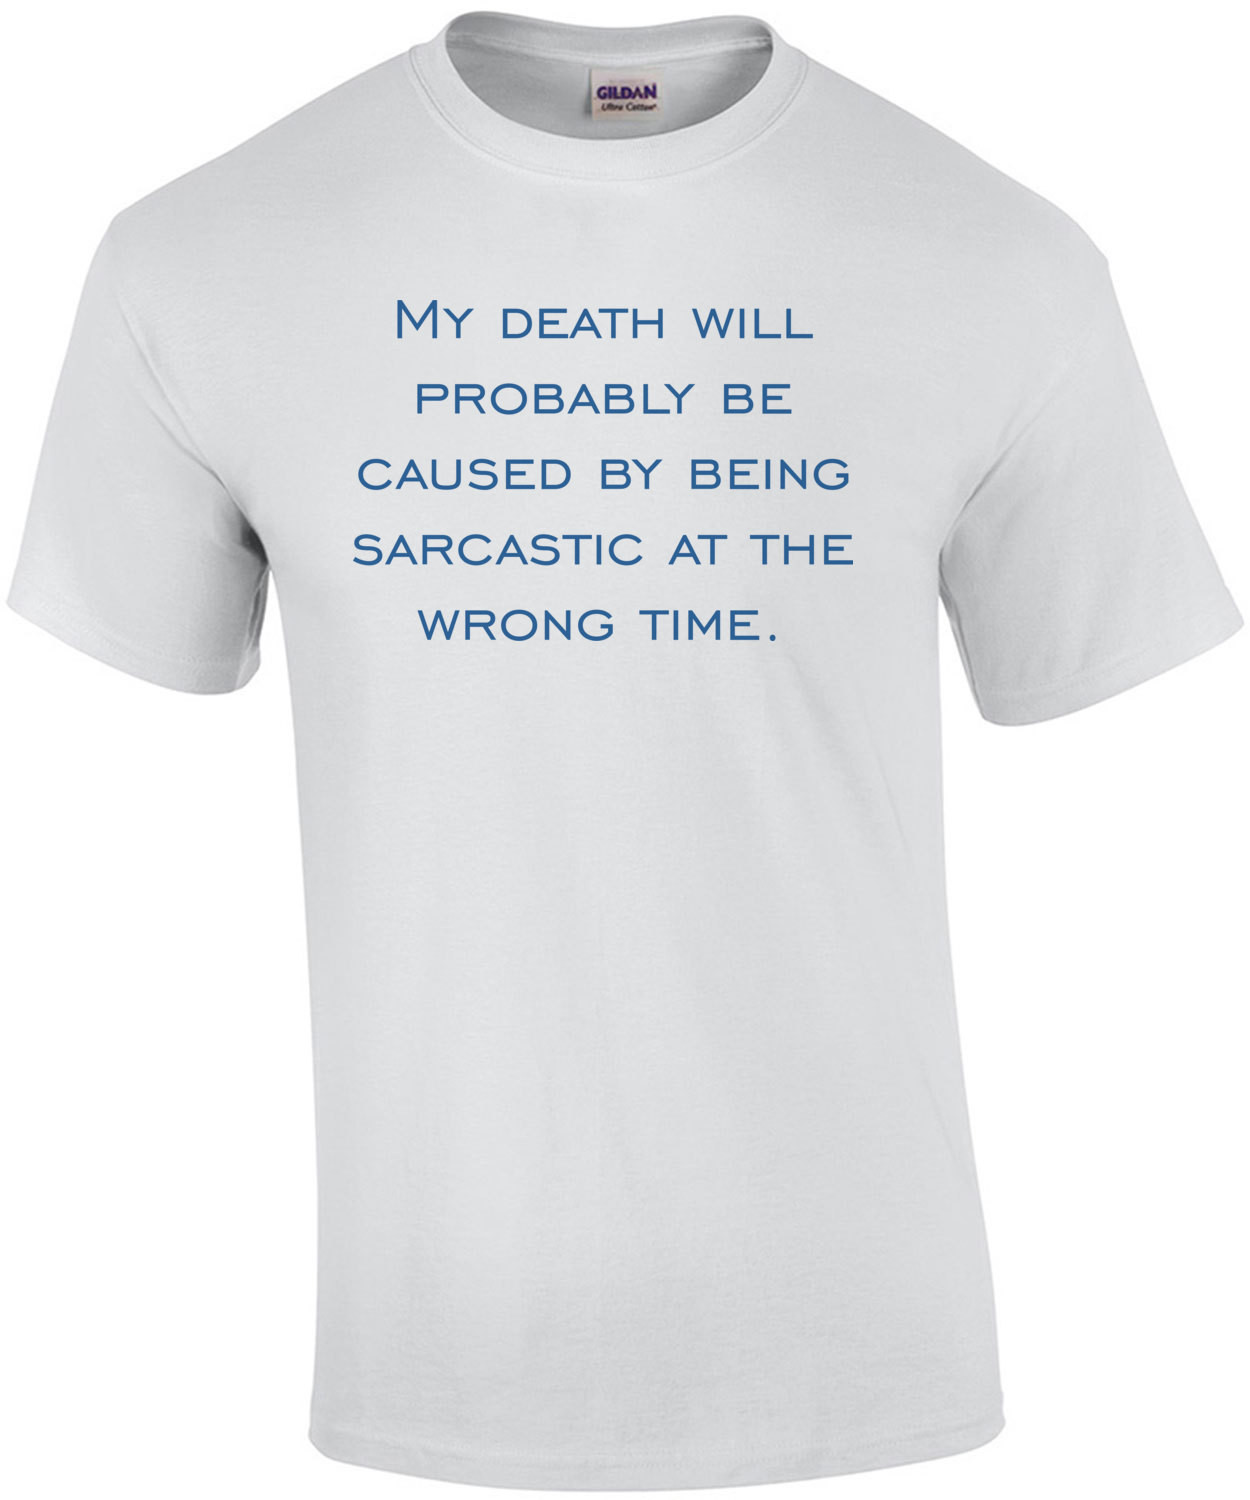 My death will probably be caused by being sarcastic at the wrong time. T-Shirt